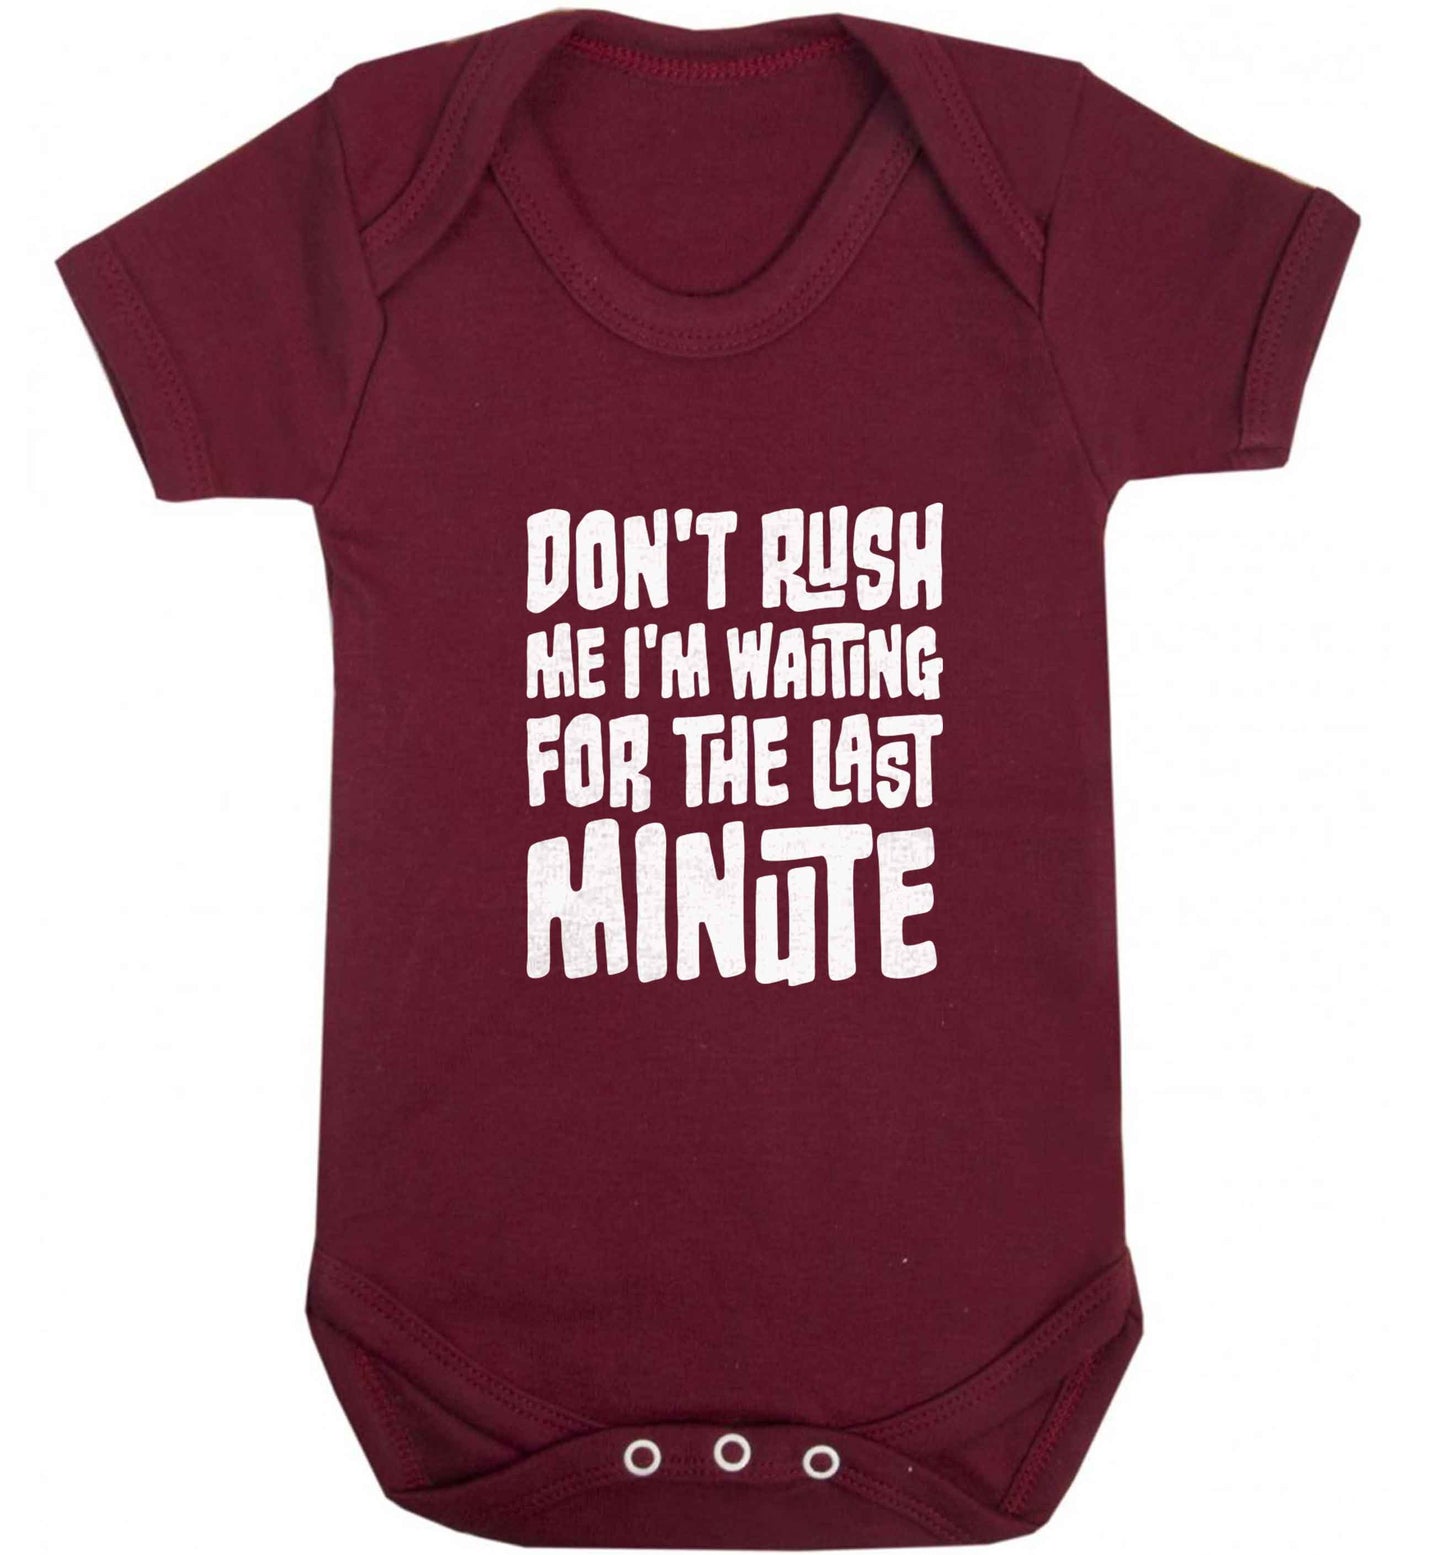 Don't rush me I'm waiting for the last minute baby vest maroon 18-24 months